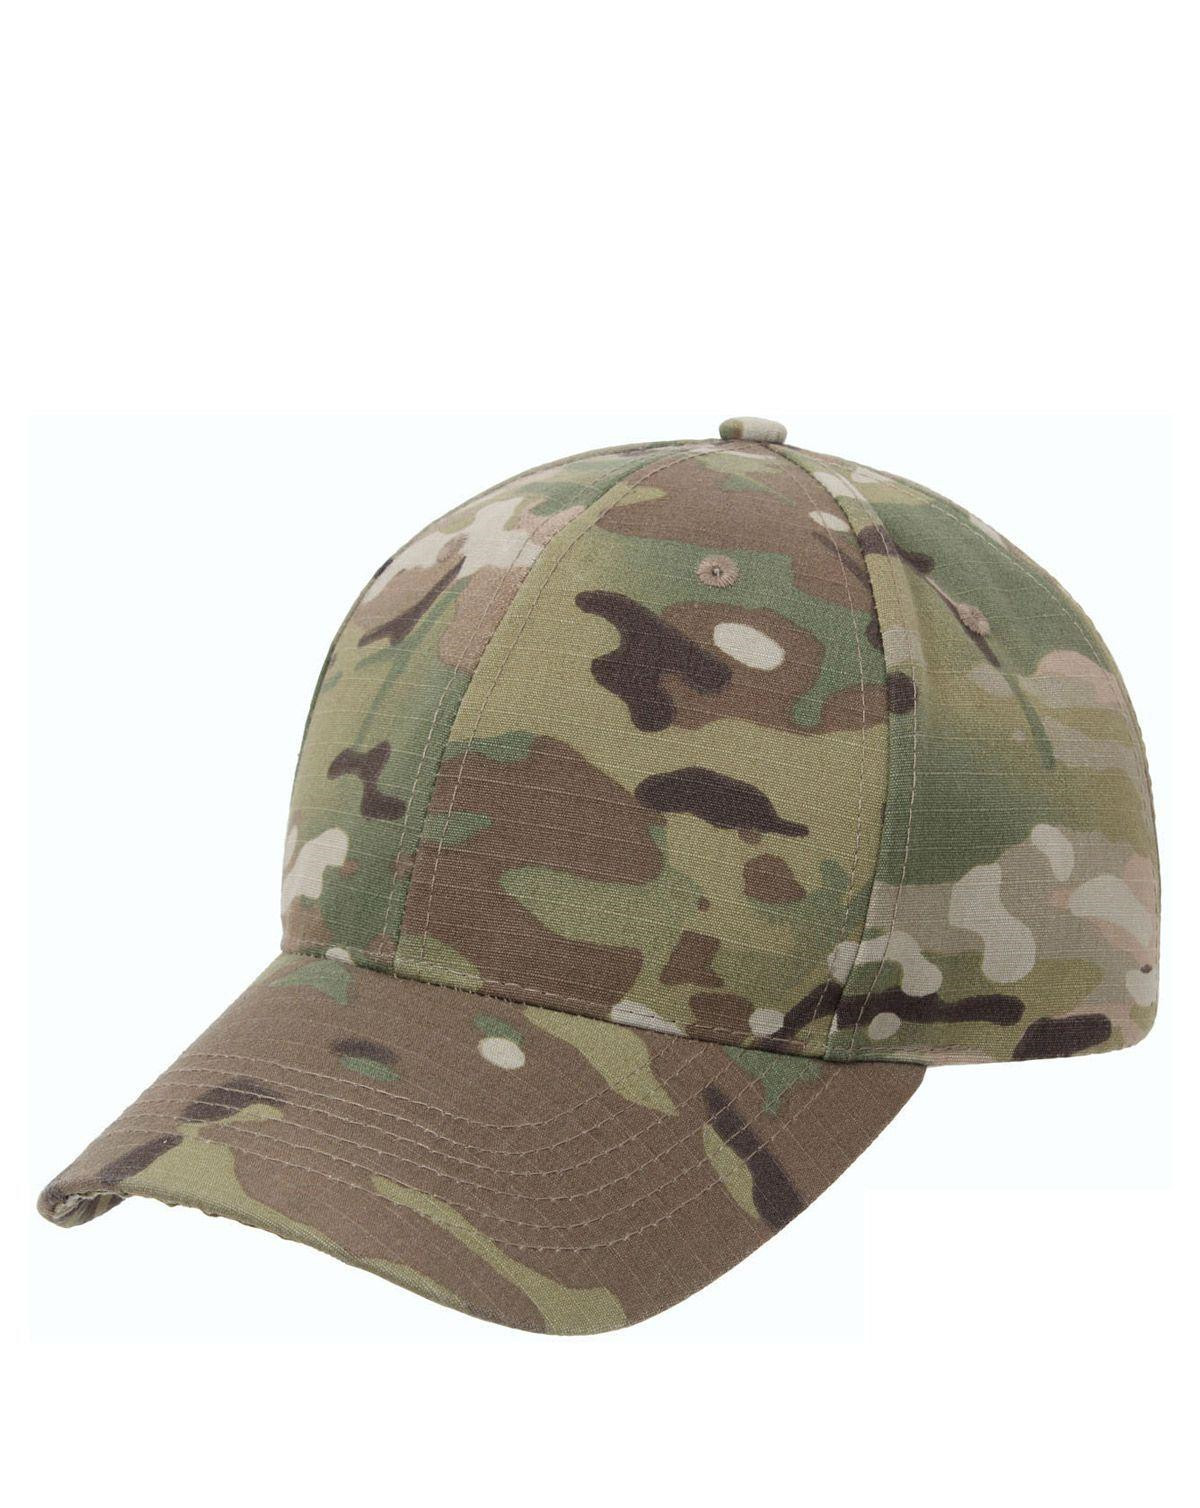 Rothco Low Profile Baseball Cap (Multicam, One Size)